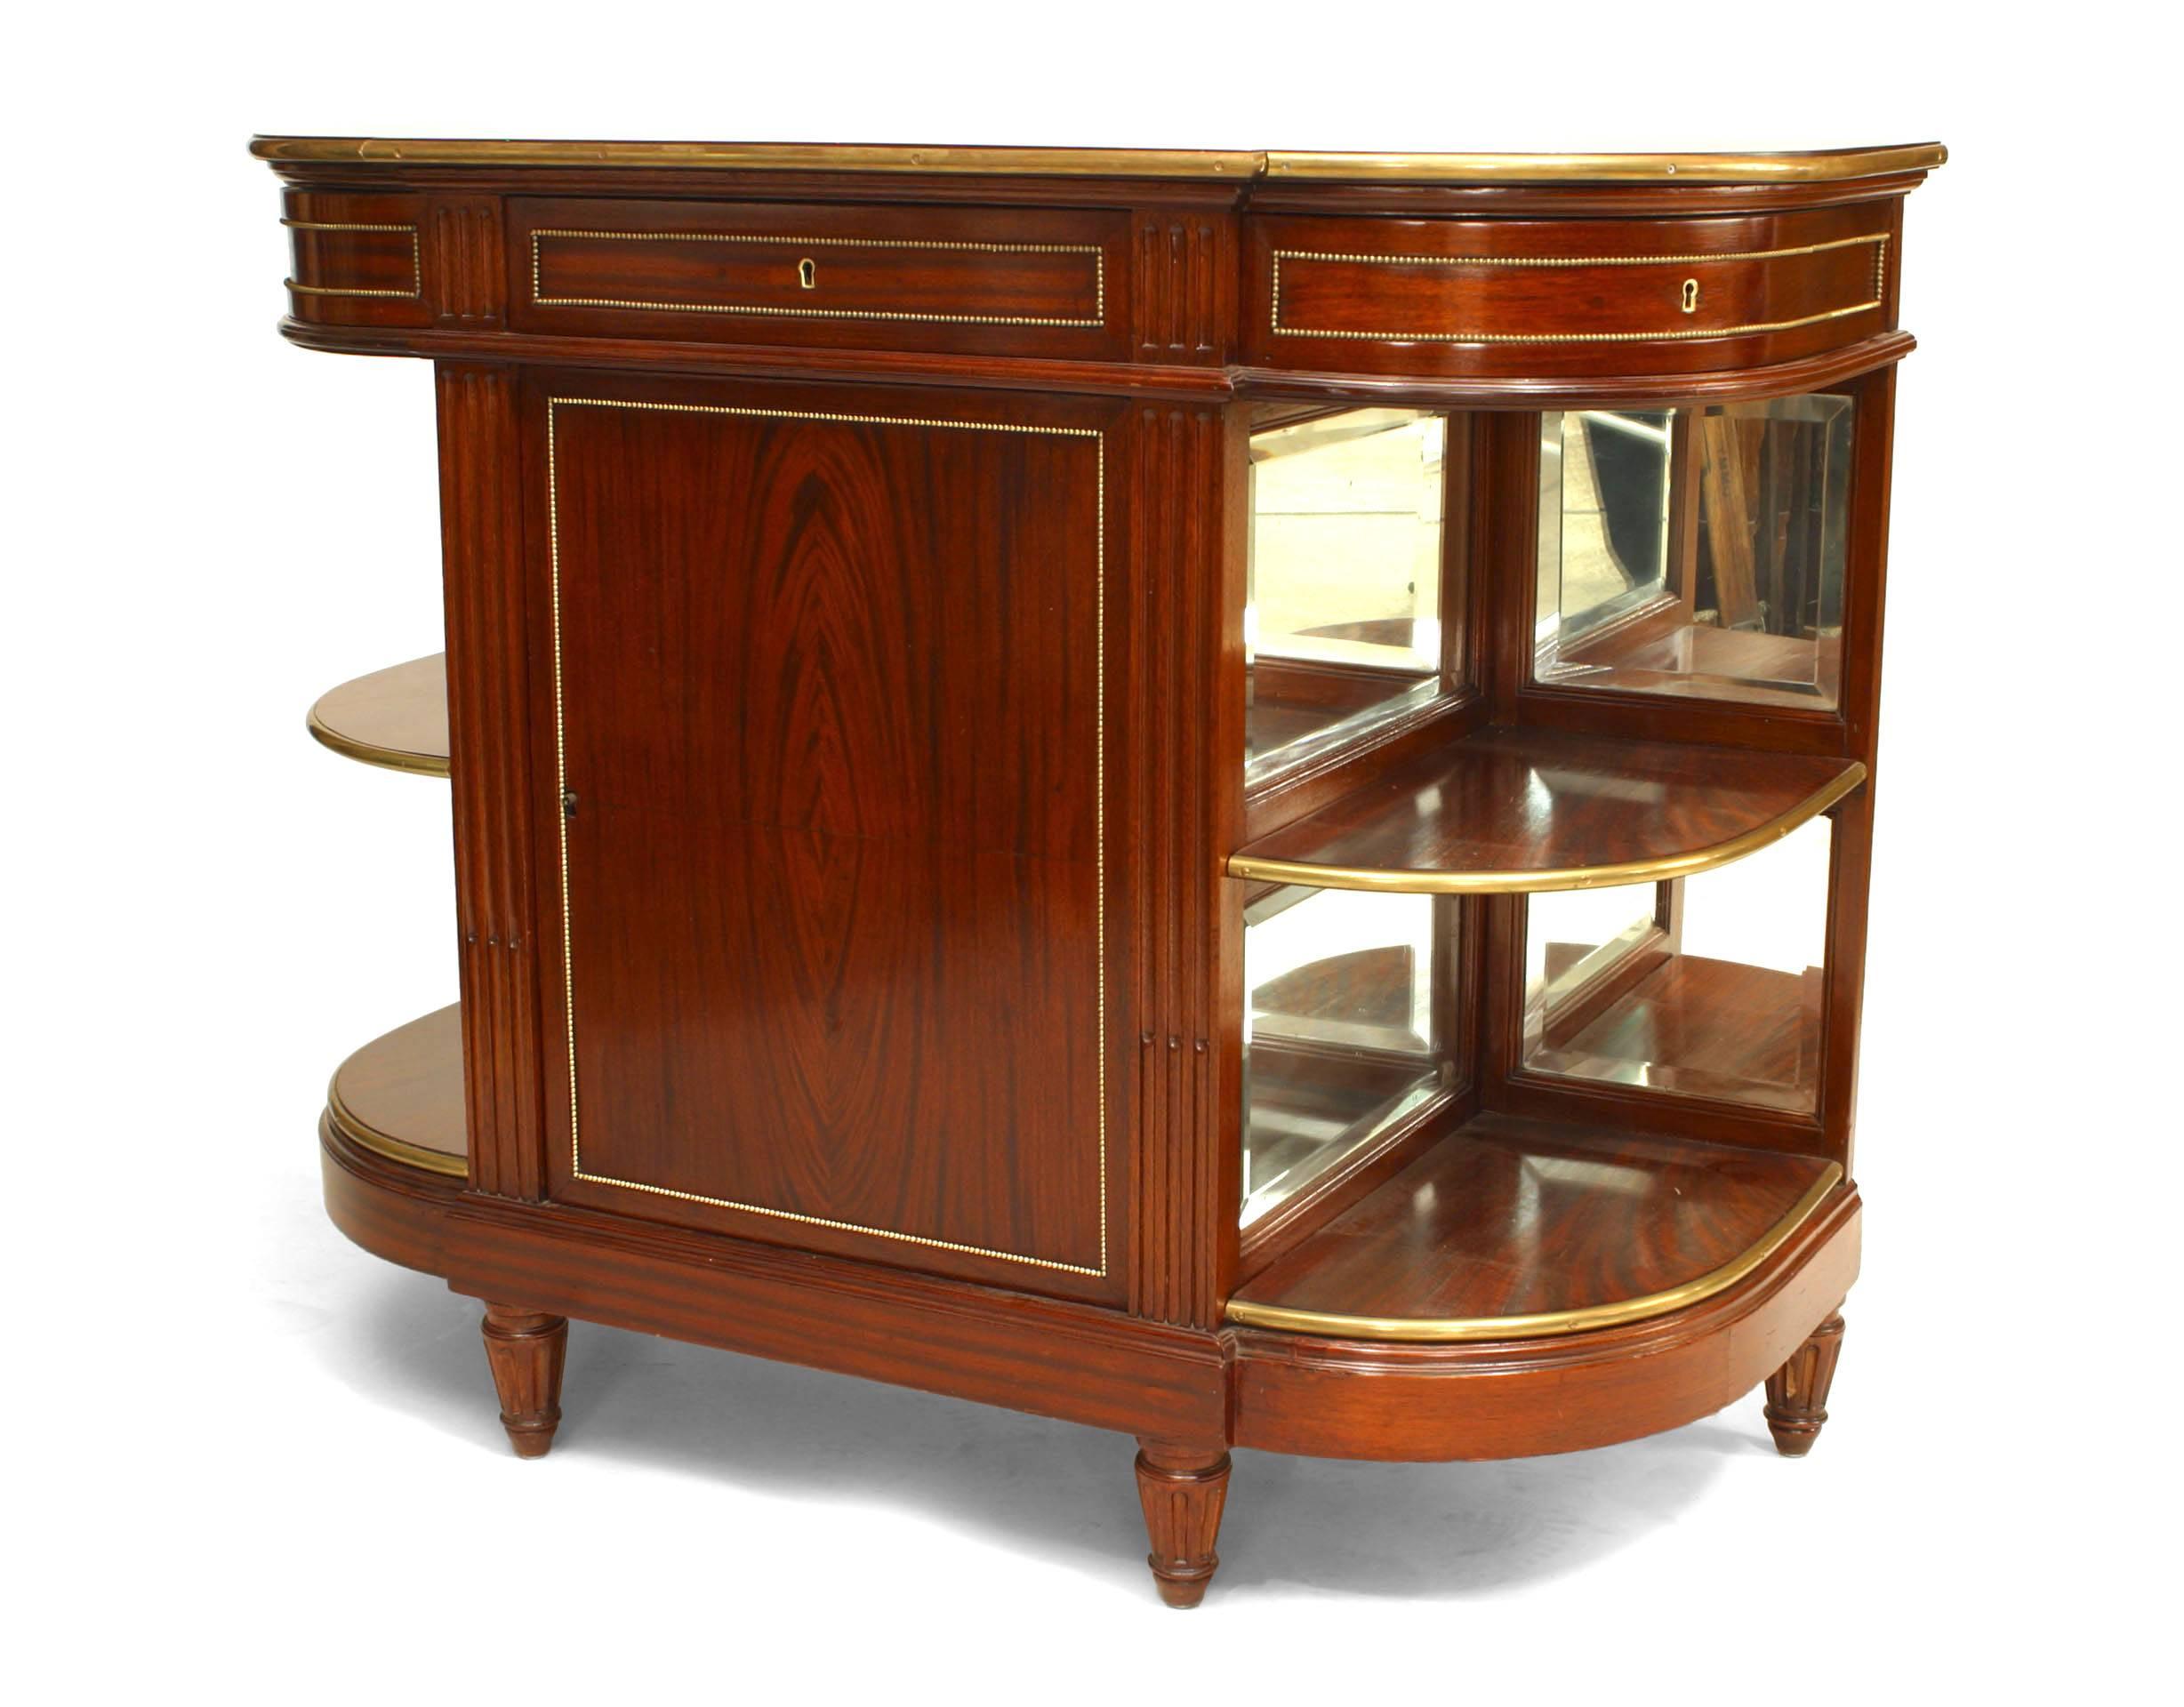 French Louis XVI-style (19th Century) mahogany server cabinet with brass trim and side shelves with a mirror back and a single front door and drawer.
